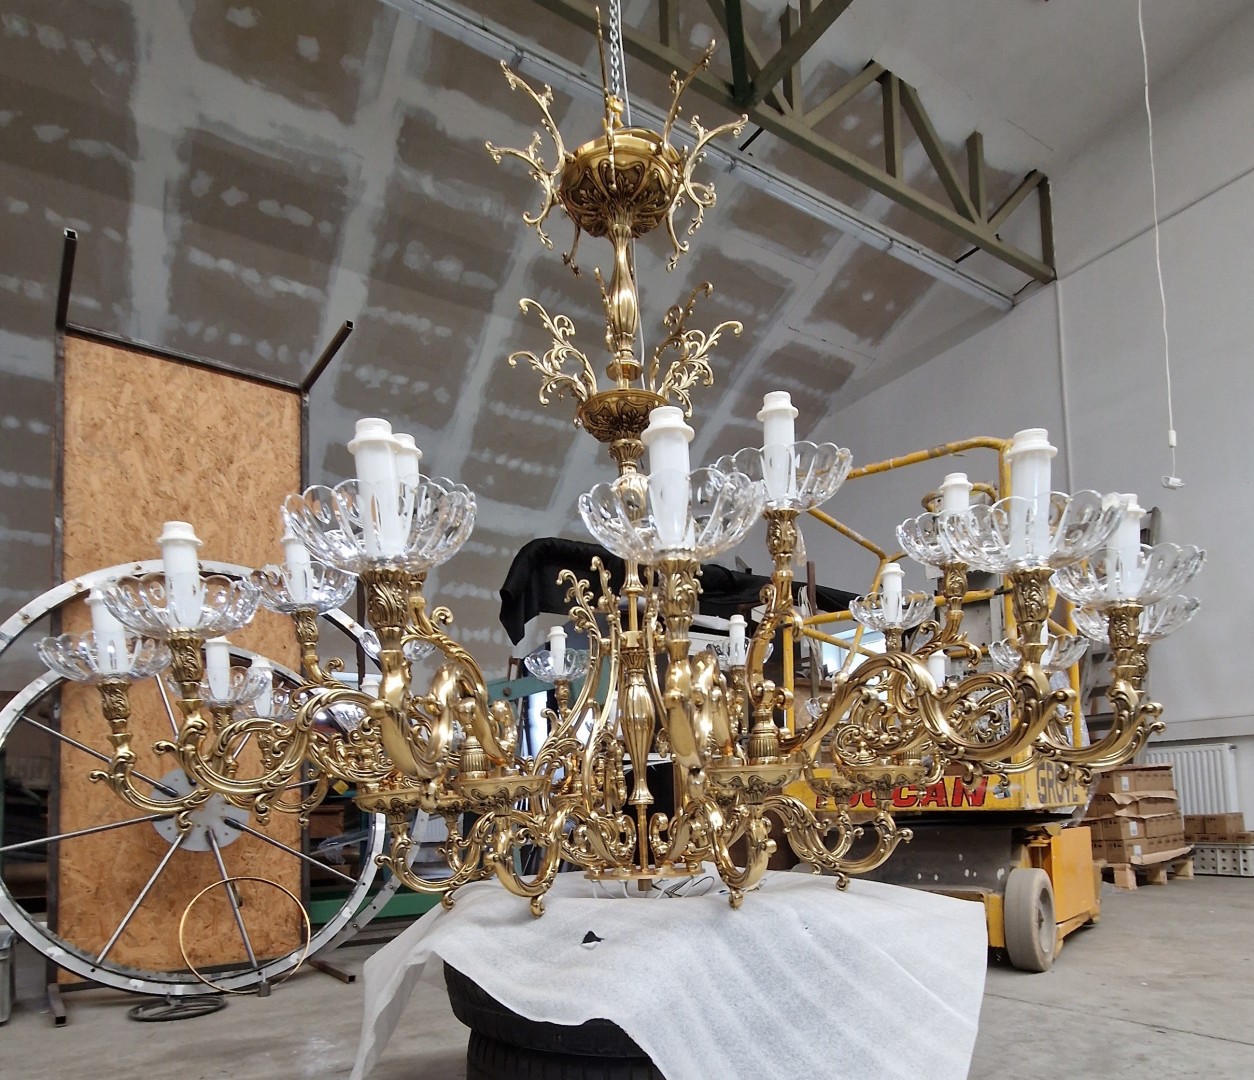 Large Solid Brass Chandelier